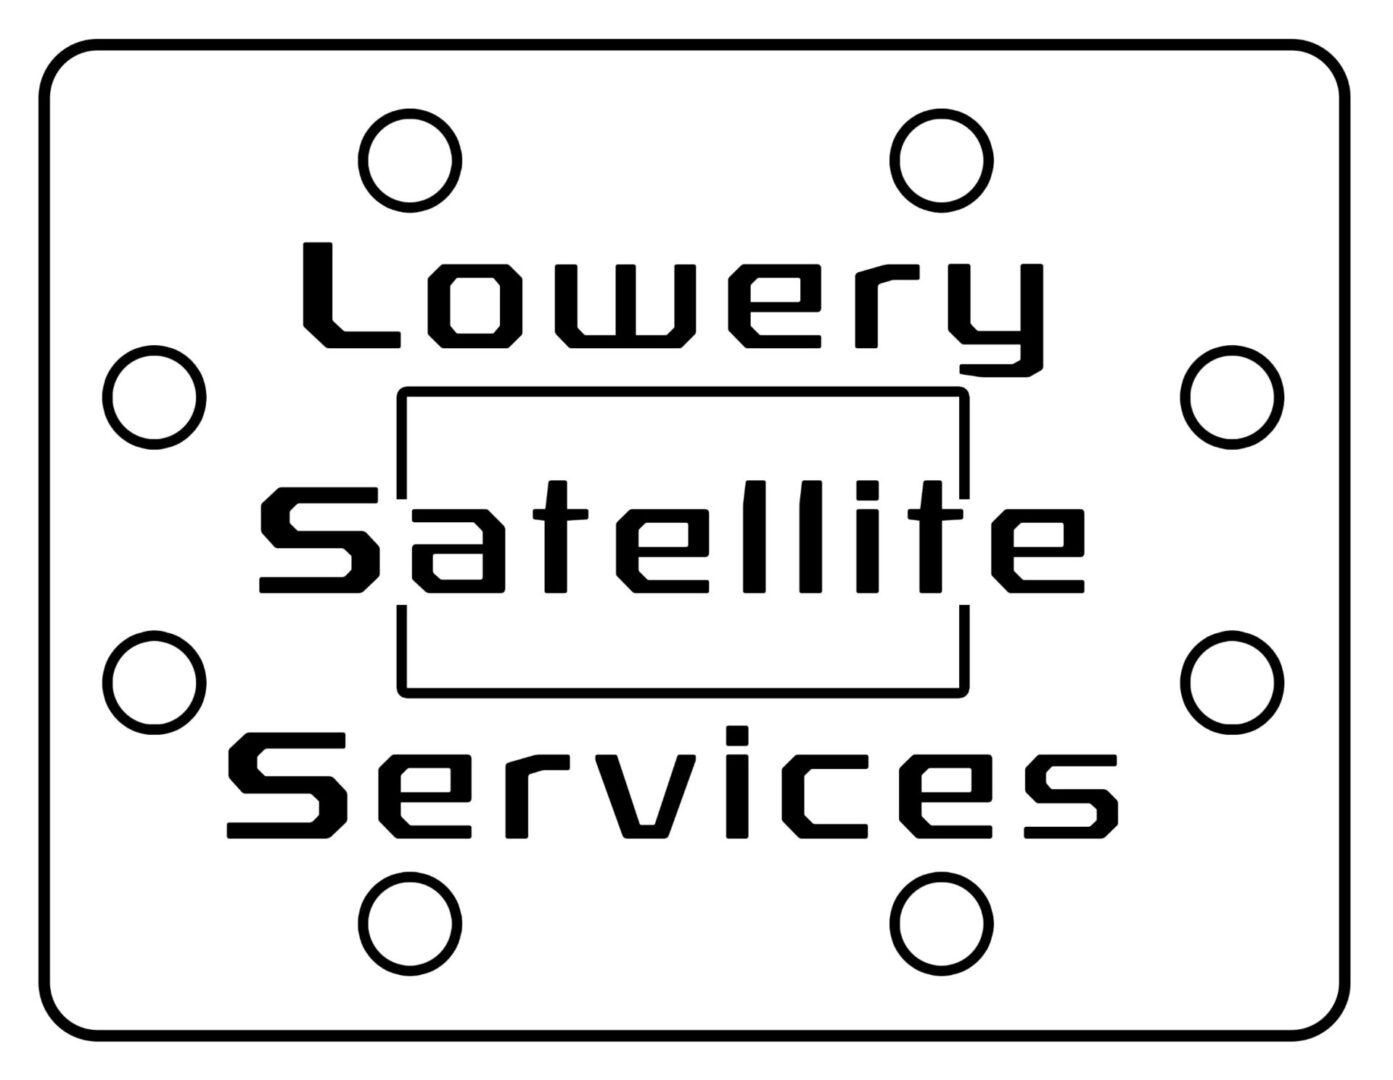 A black and white image of the logo for lowery satellite services.